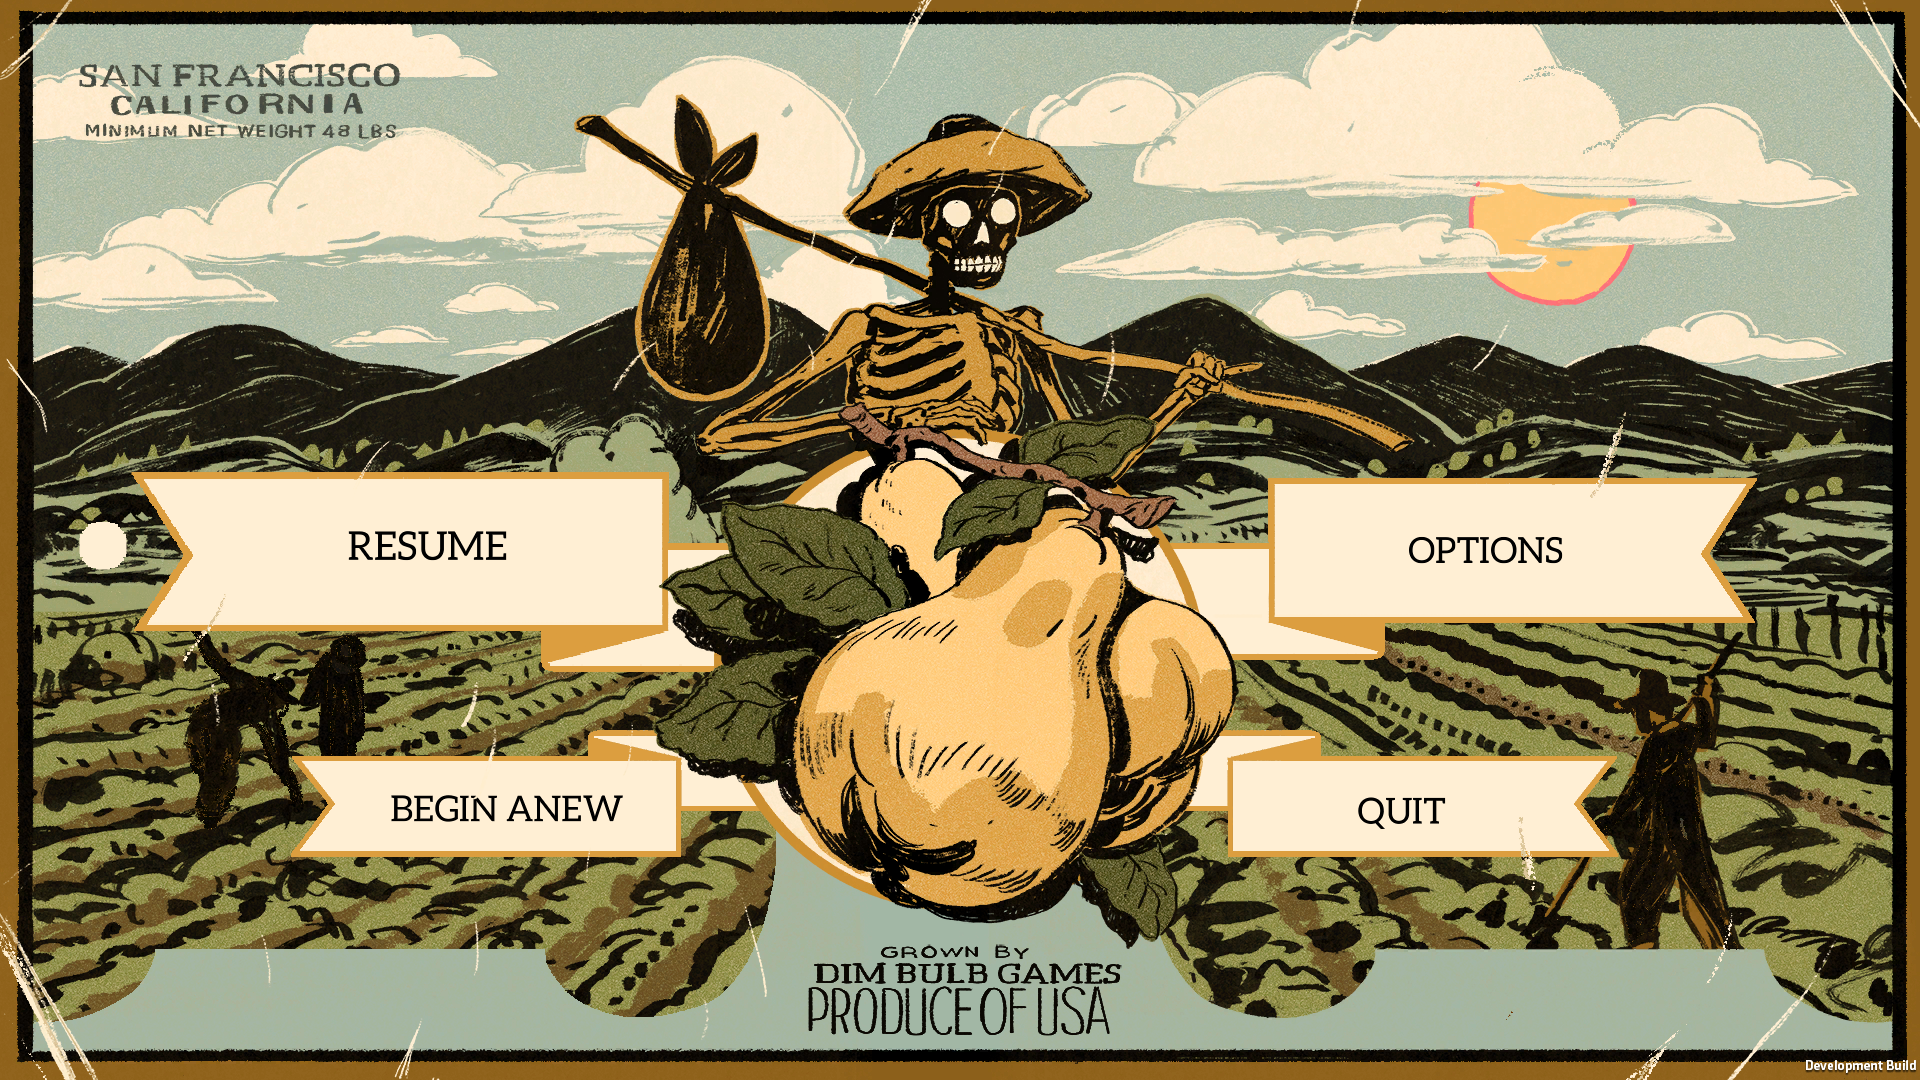 The game's pause menu, made to look like a farm's produce ad, featuring the protagonist the walking skeleton